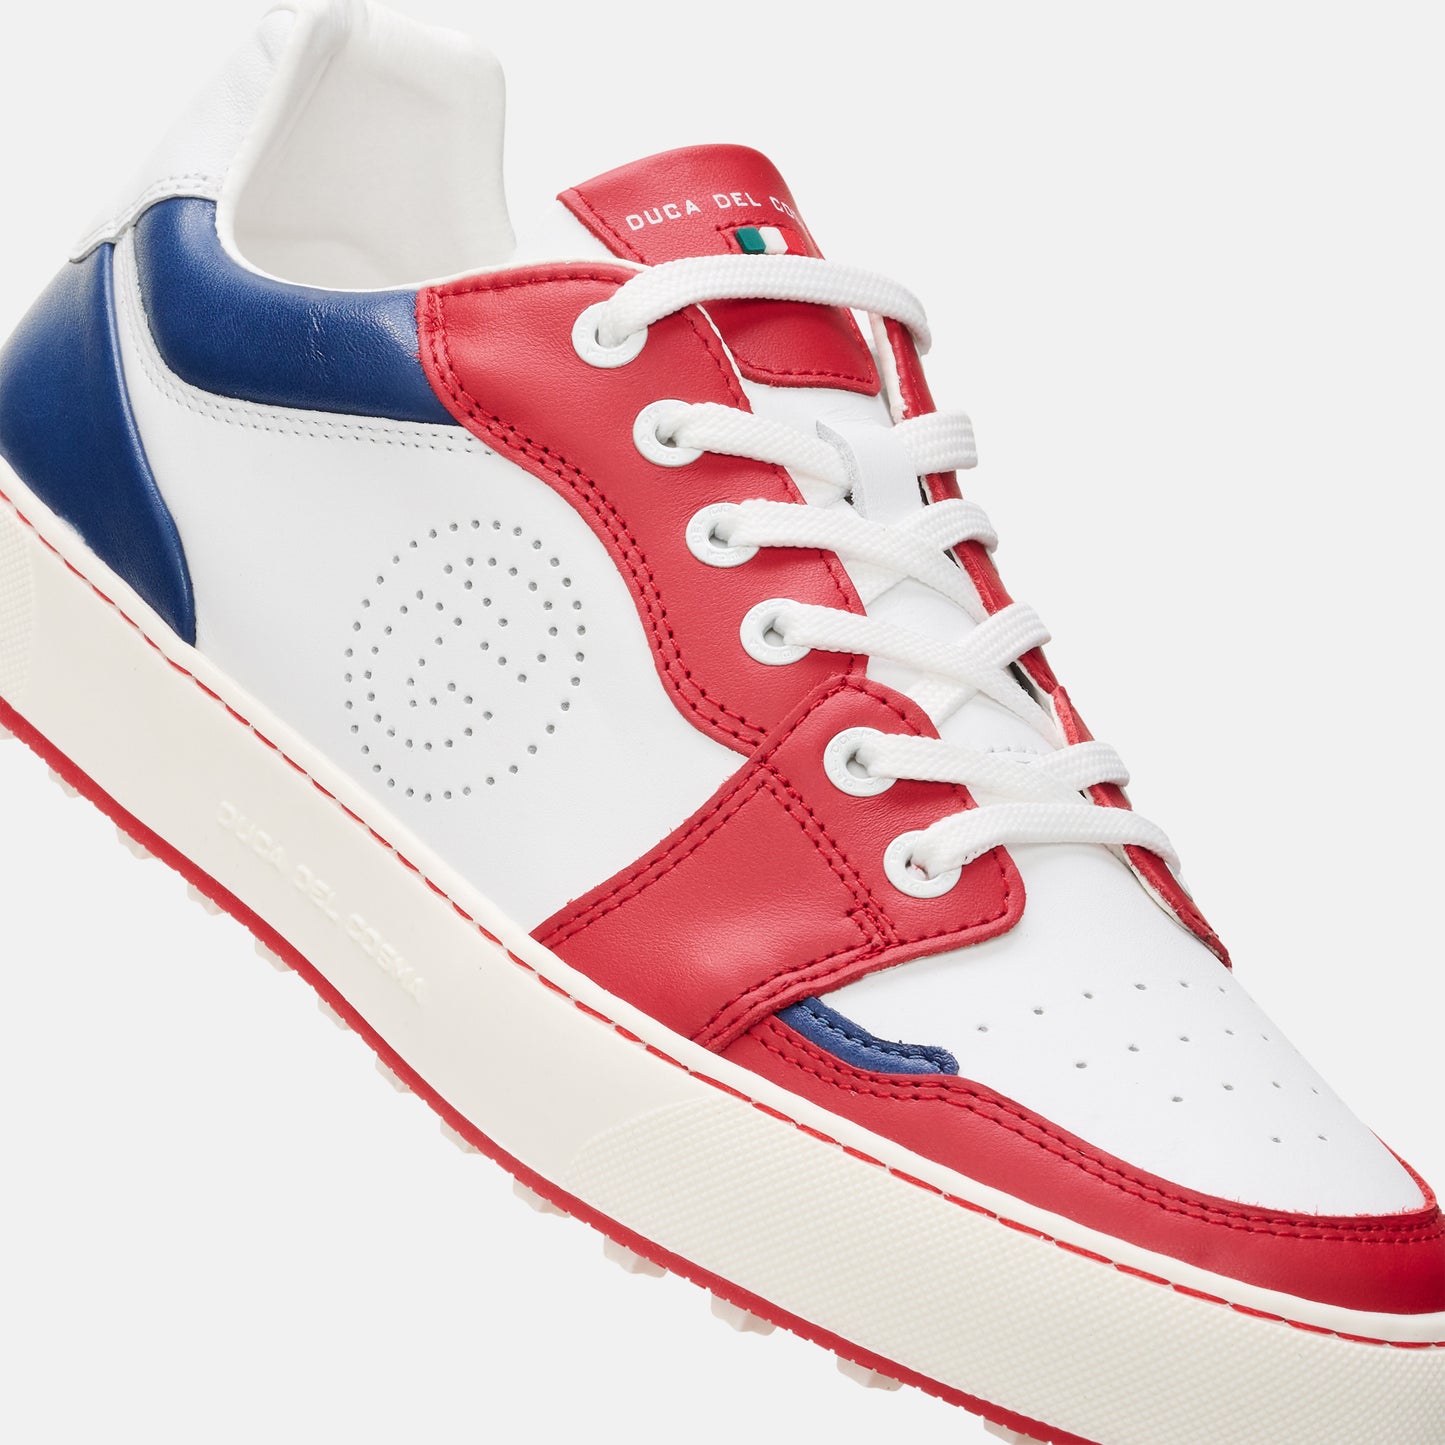 Red Golf Shoes, Men's Blue Golf Shoes, Men's Golf Shoes Duca del Cosma, Spikeless Golf Shoes.